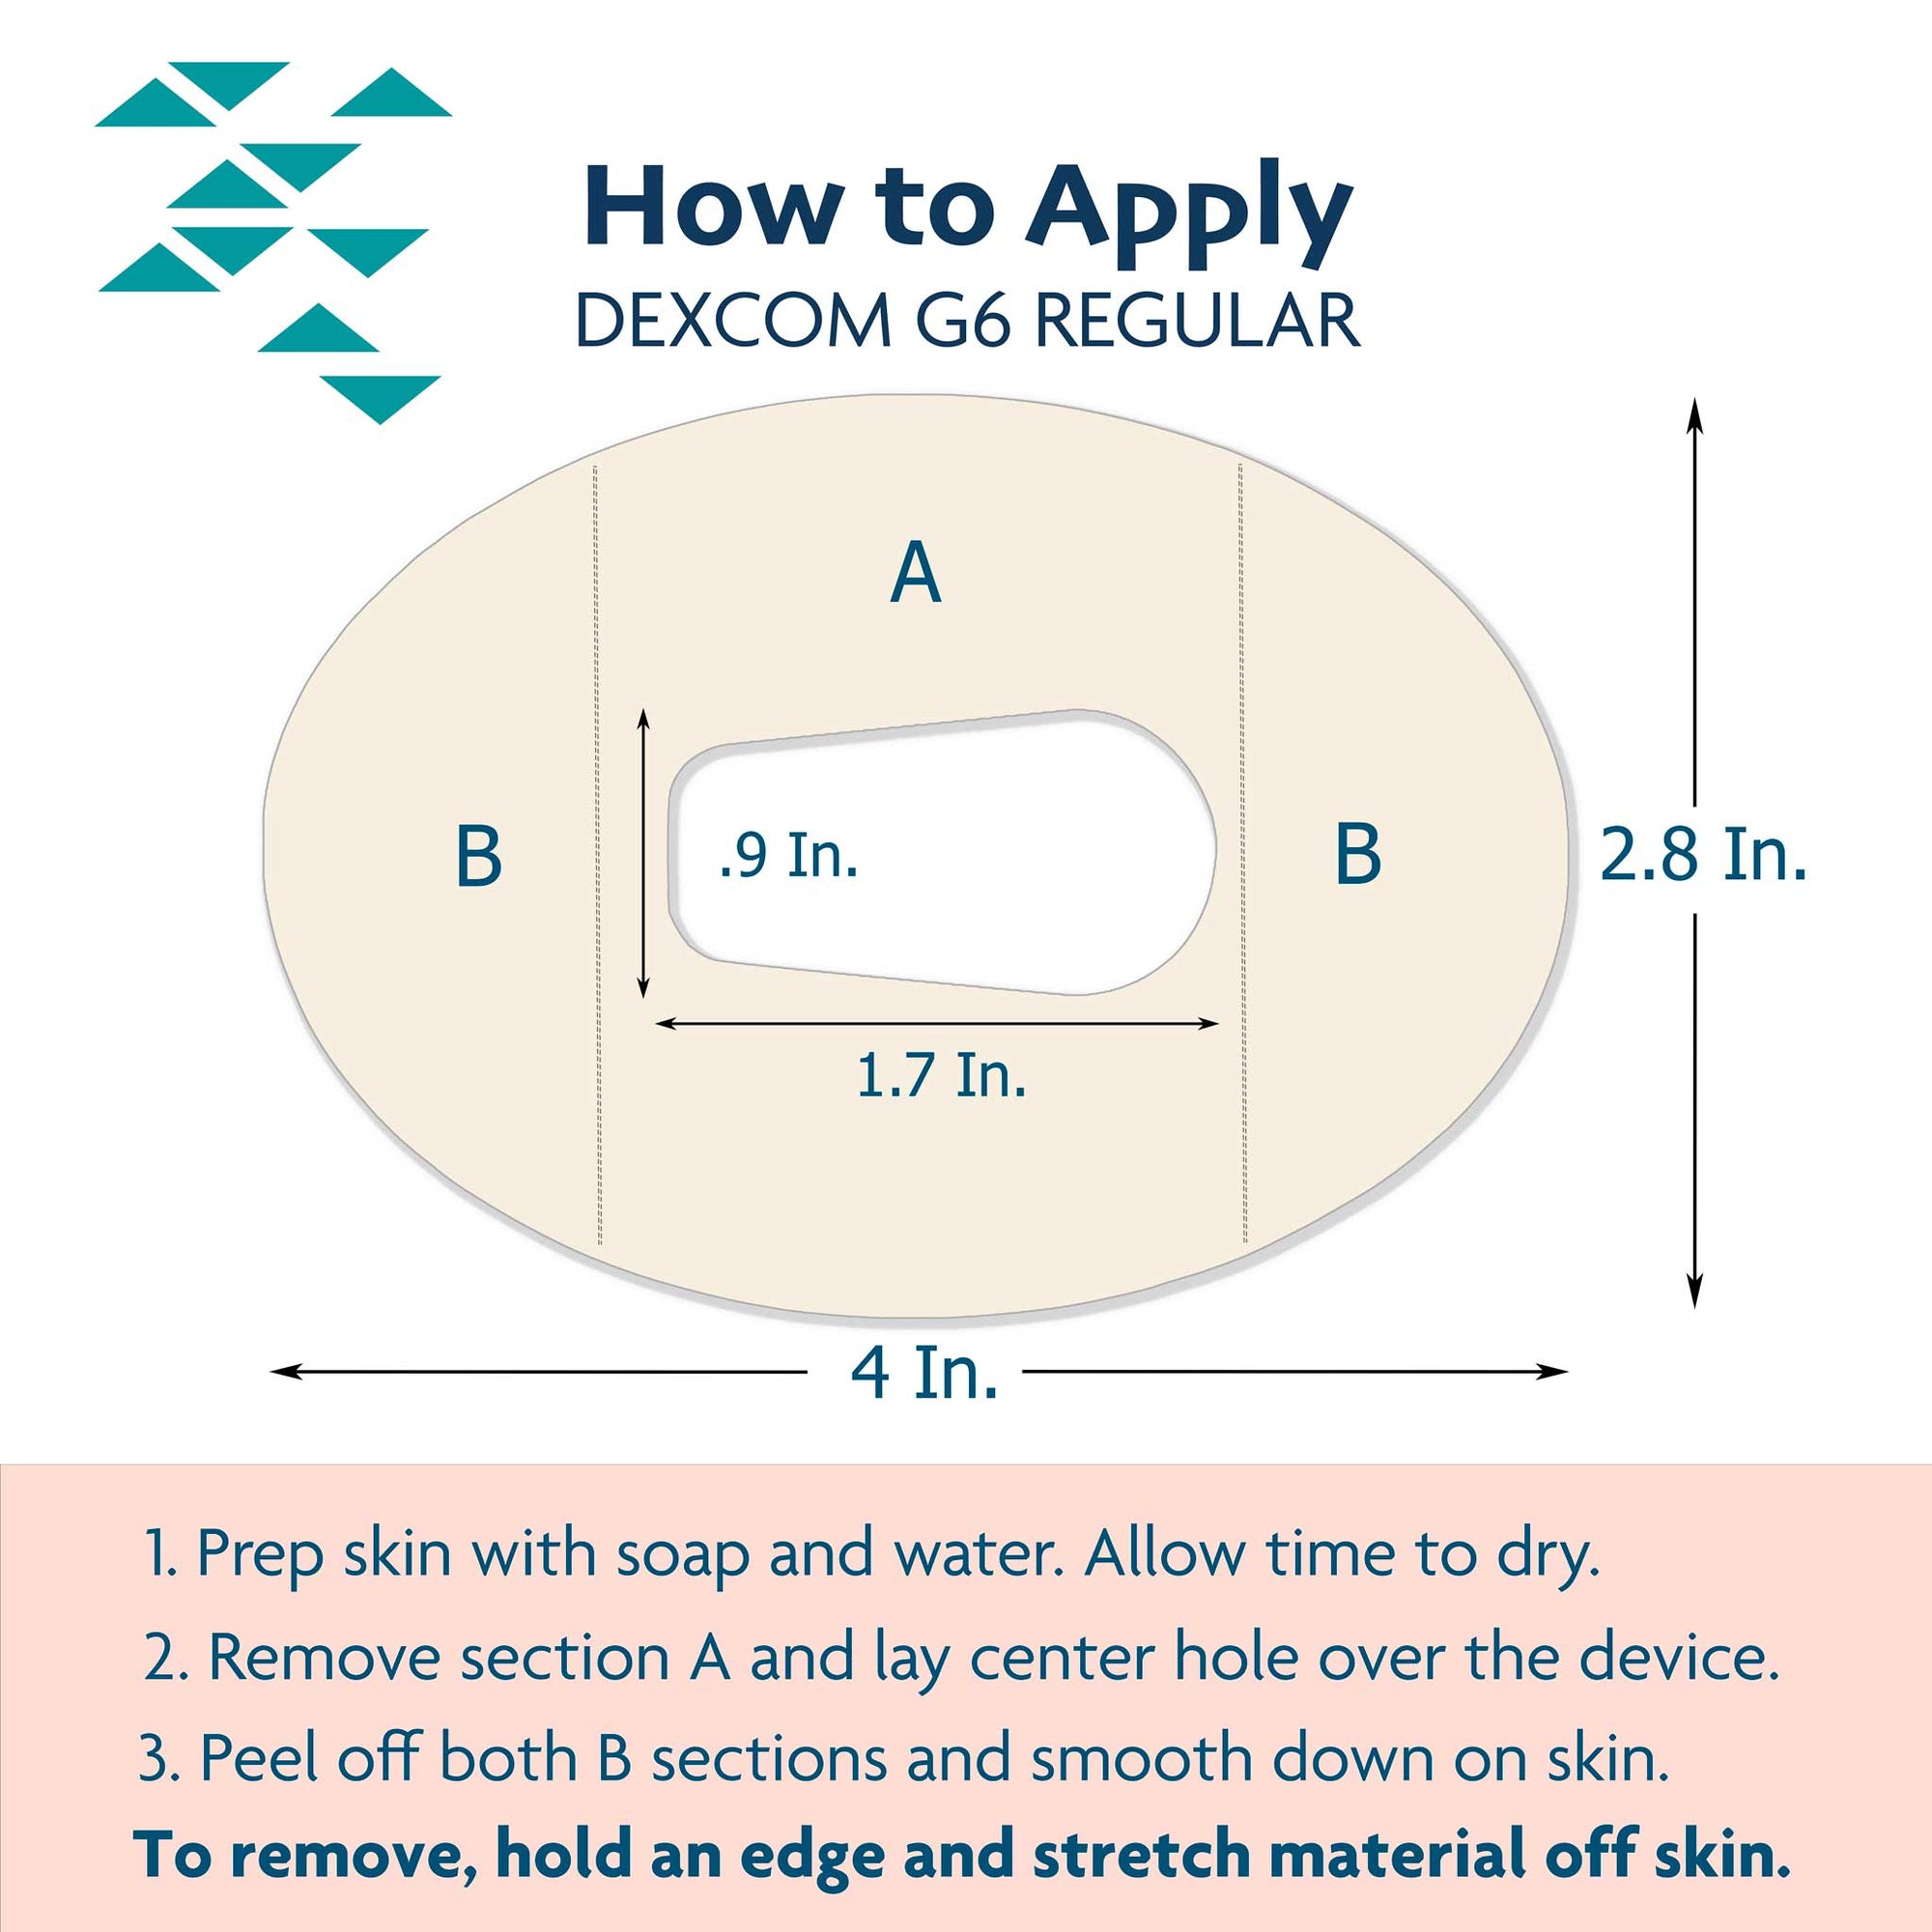 ExpressionMed Dexcom G6 Overlay Patch Application Instructions and Dimensions